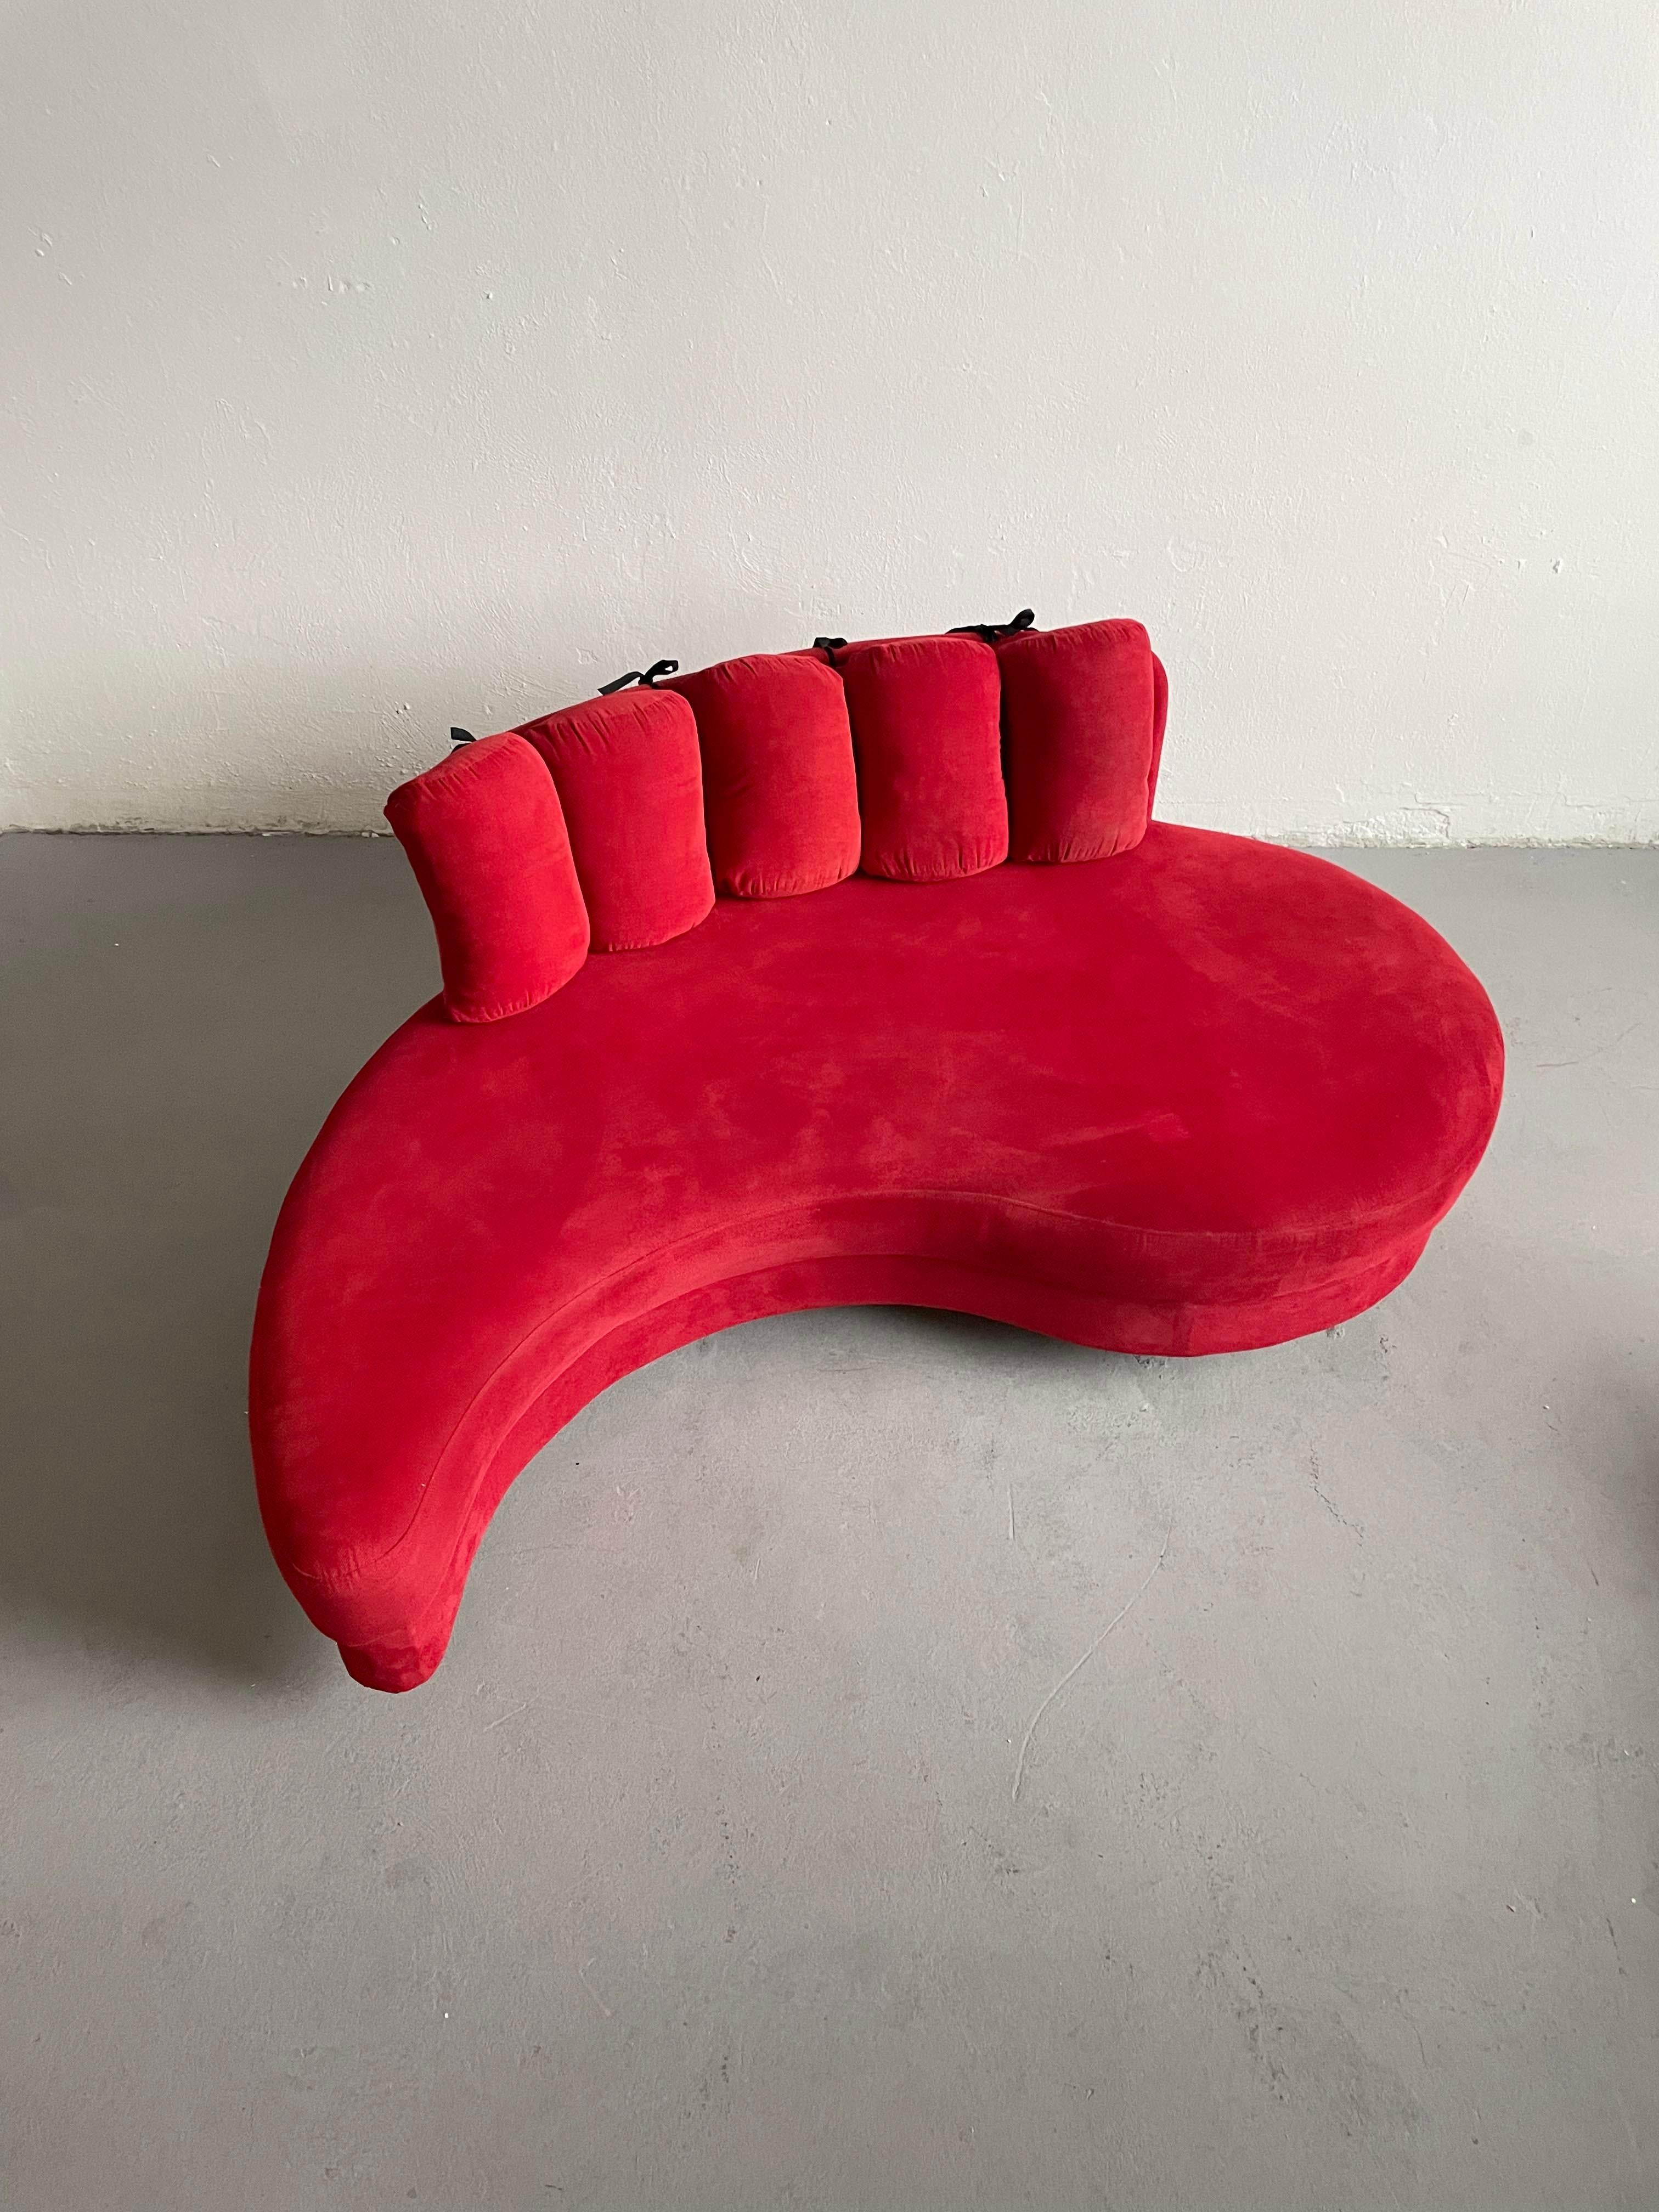 Set of 2 Postmodern Curved Yin-Yang Shaped Sofa Daybeds in Red Fabric, c 1980s For Sale 1